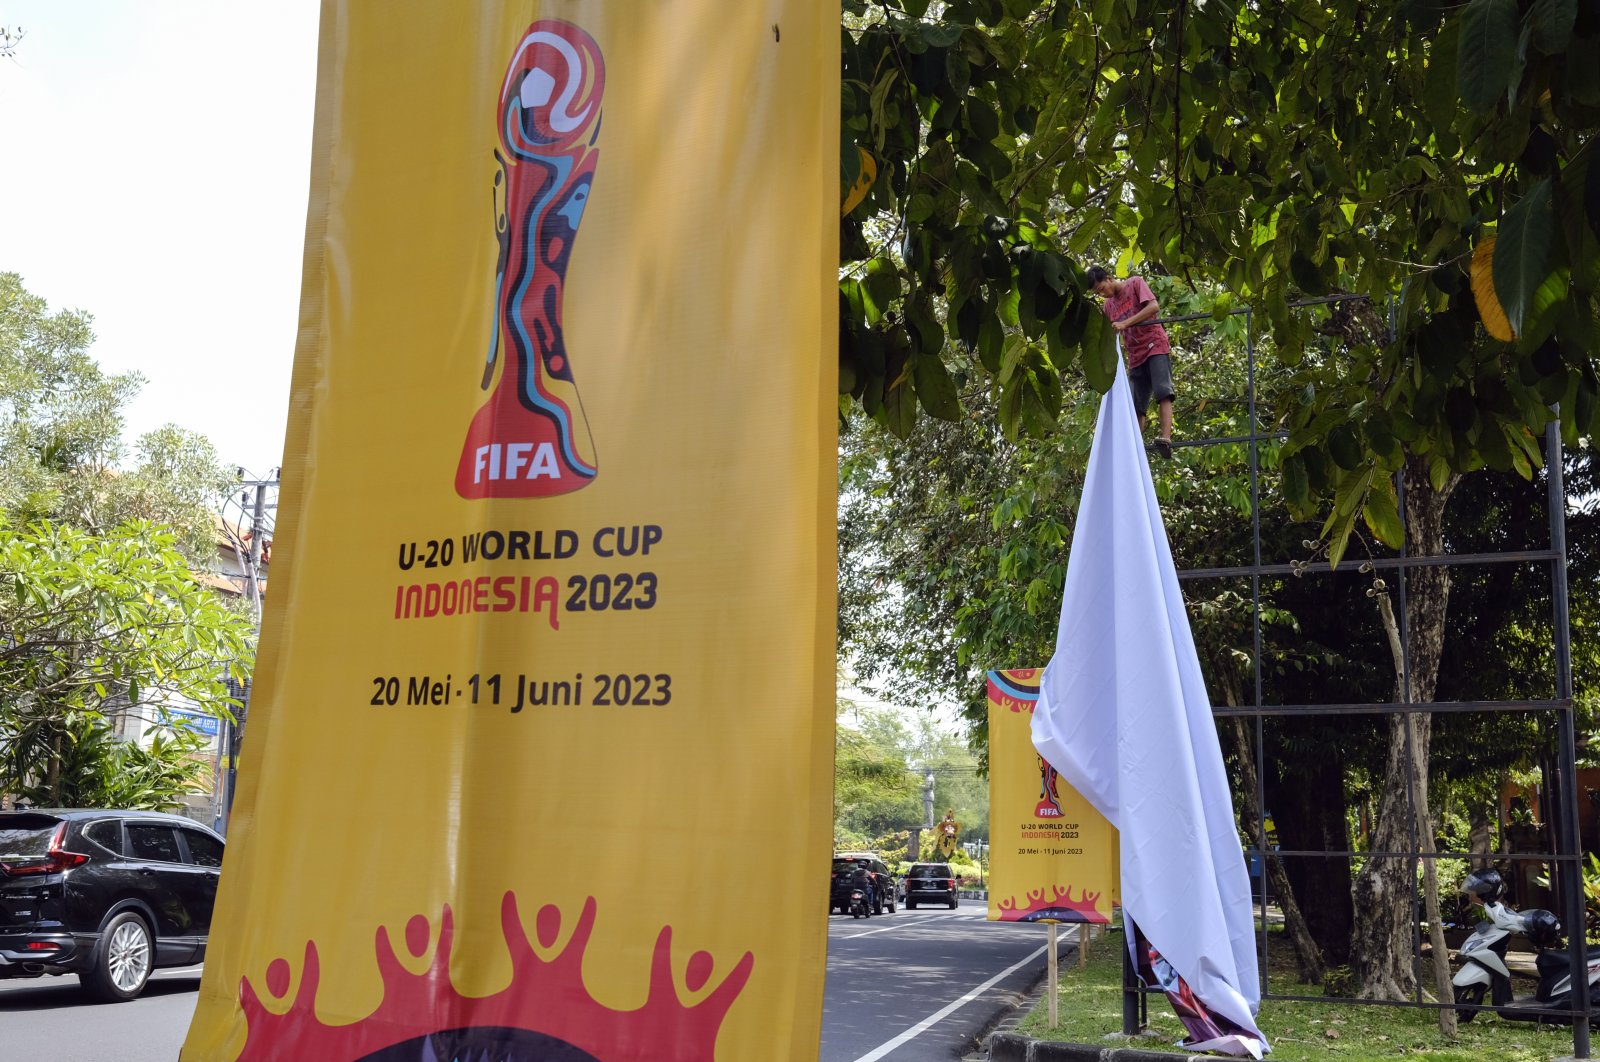 A worker removes a banner of FIFA U-20 World Cup 2023 at a main road, Denpasar, Bali, Indonesia, March 27, 2023. (EPA Photo)